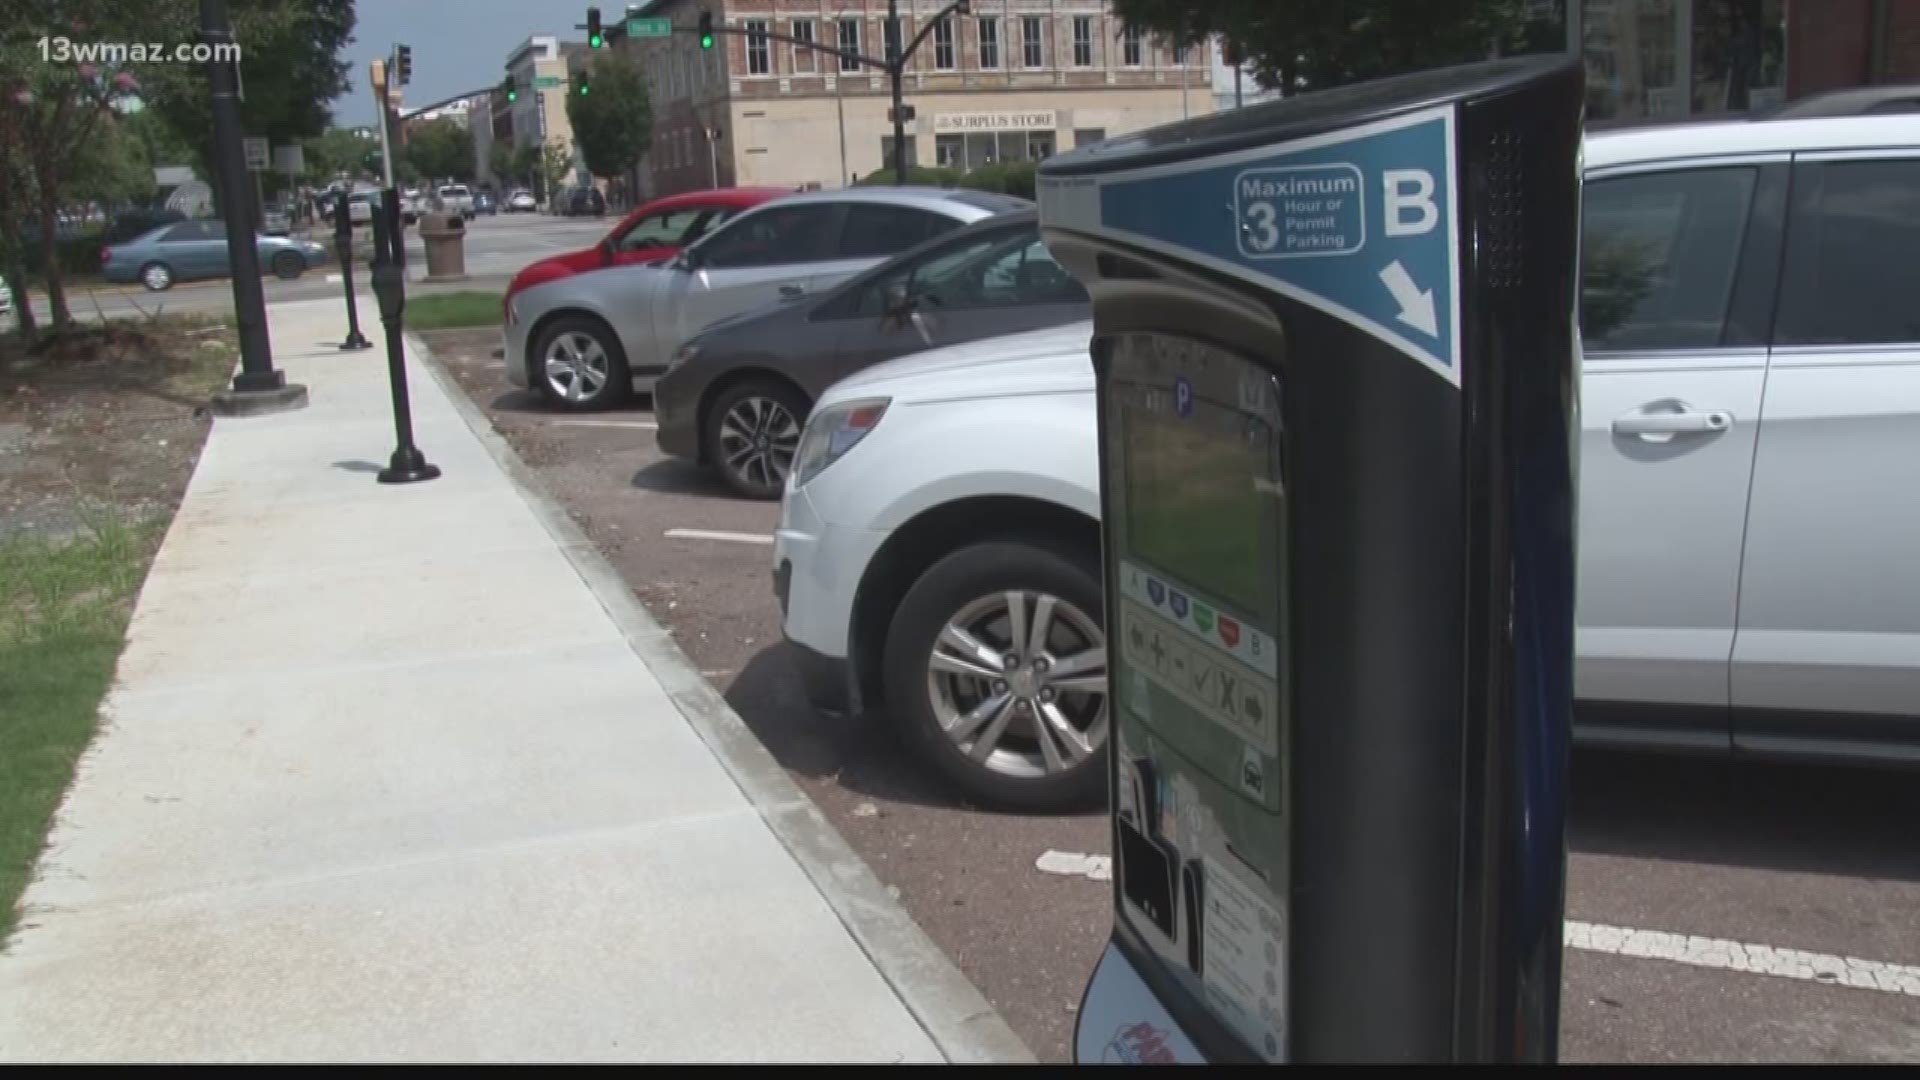 No more free parking in downtown Macon